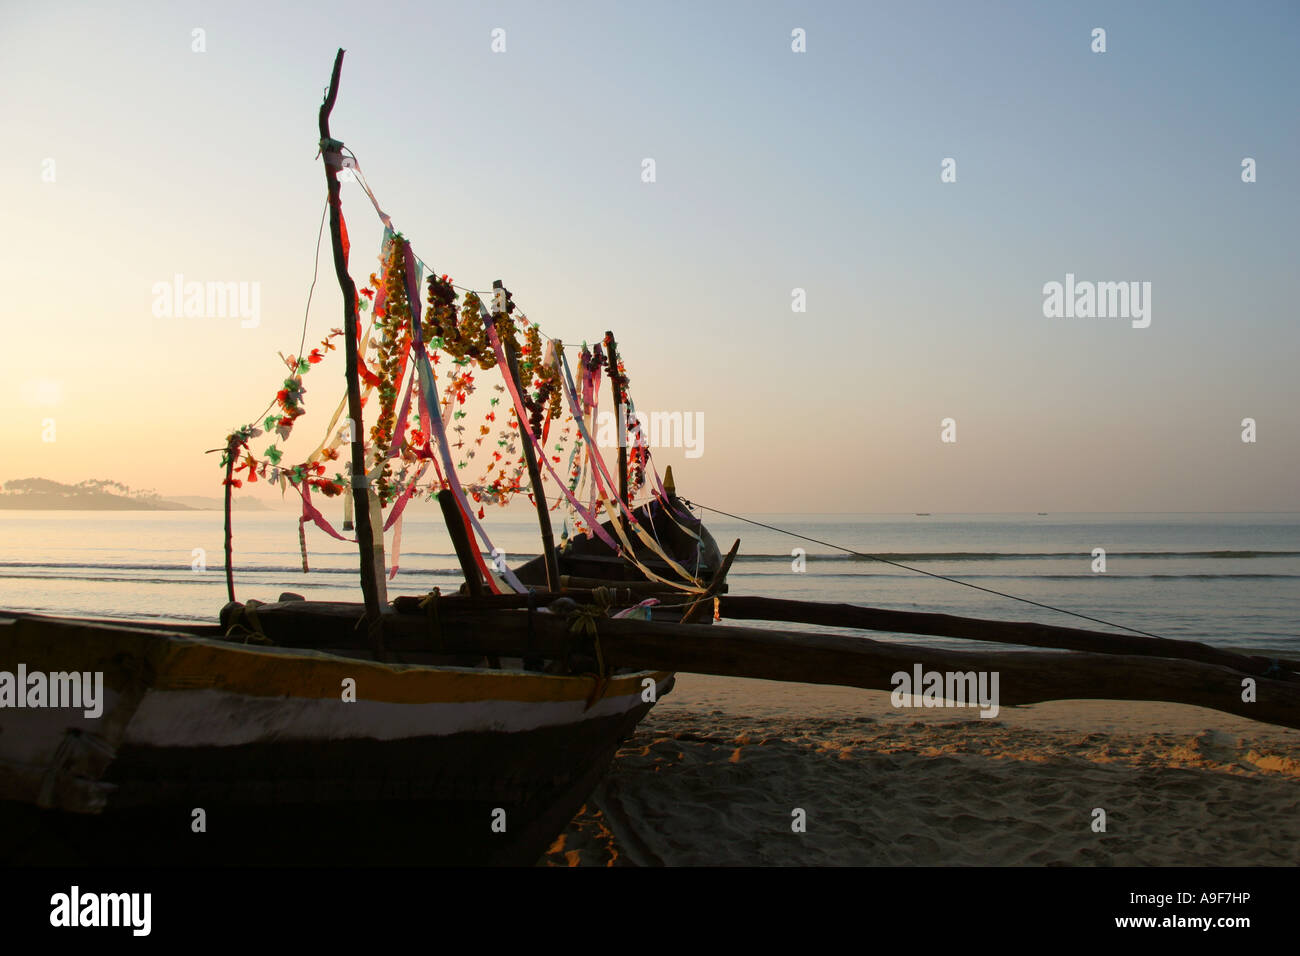 A fishermans boat decorated with flower garlands on the beach in Palolem in Southern Goa, India Stock Photo